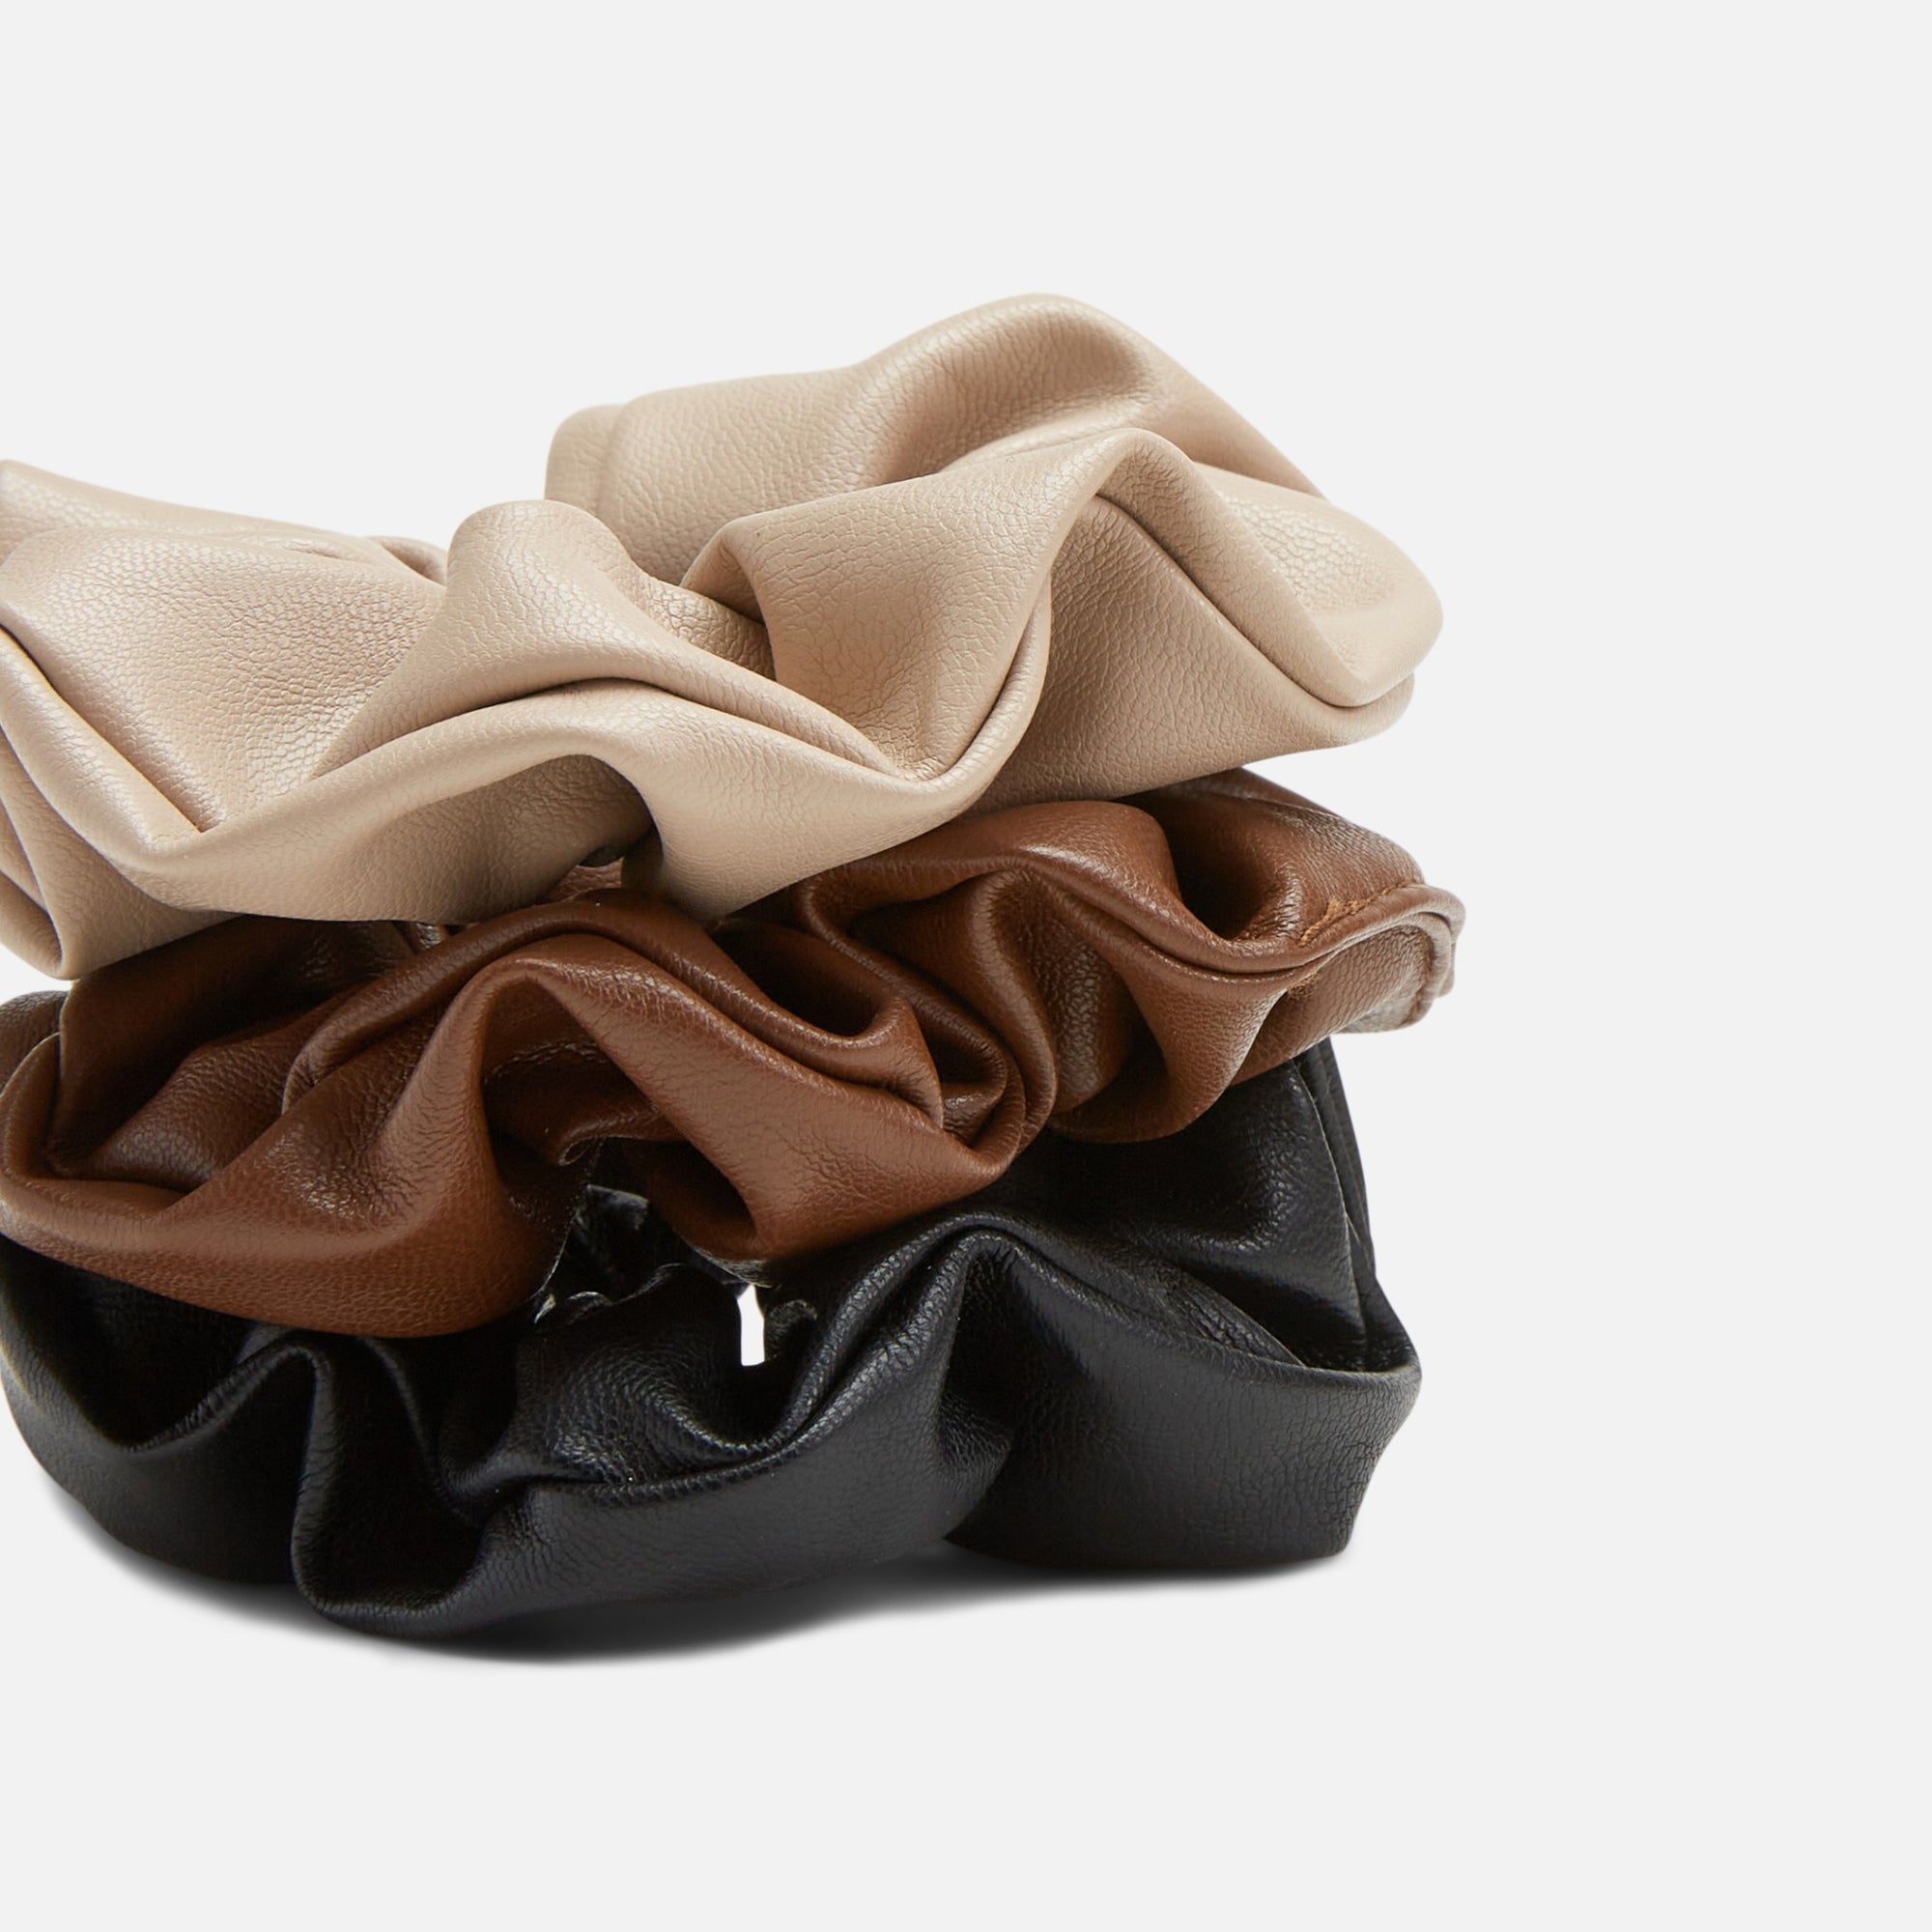 Set of three scrunchies in beige, camel and black leatherette